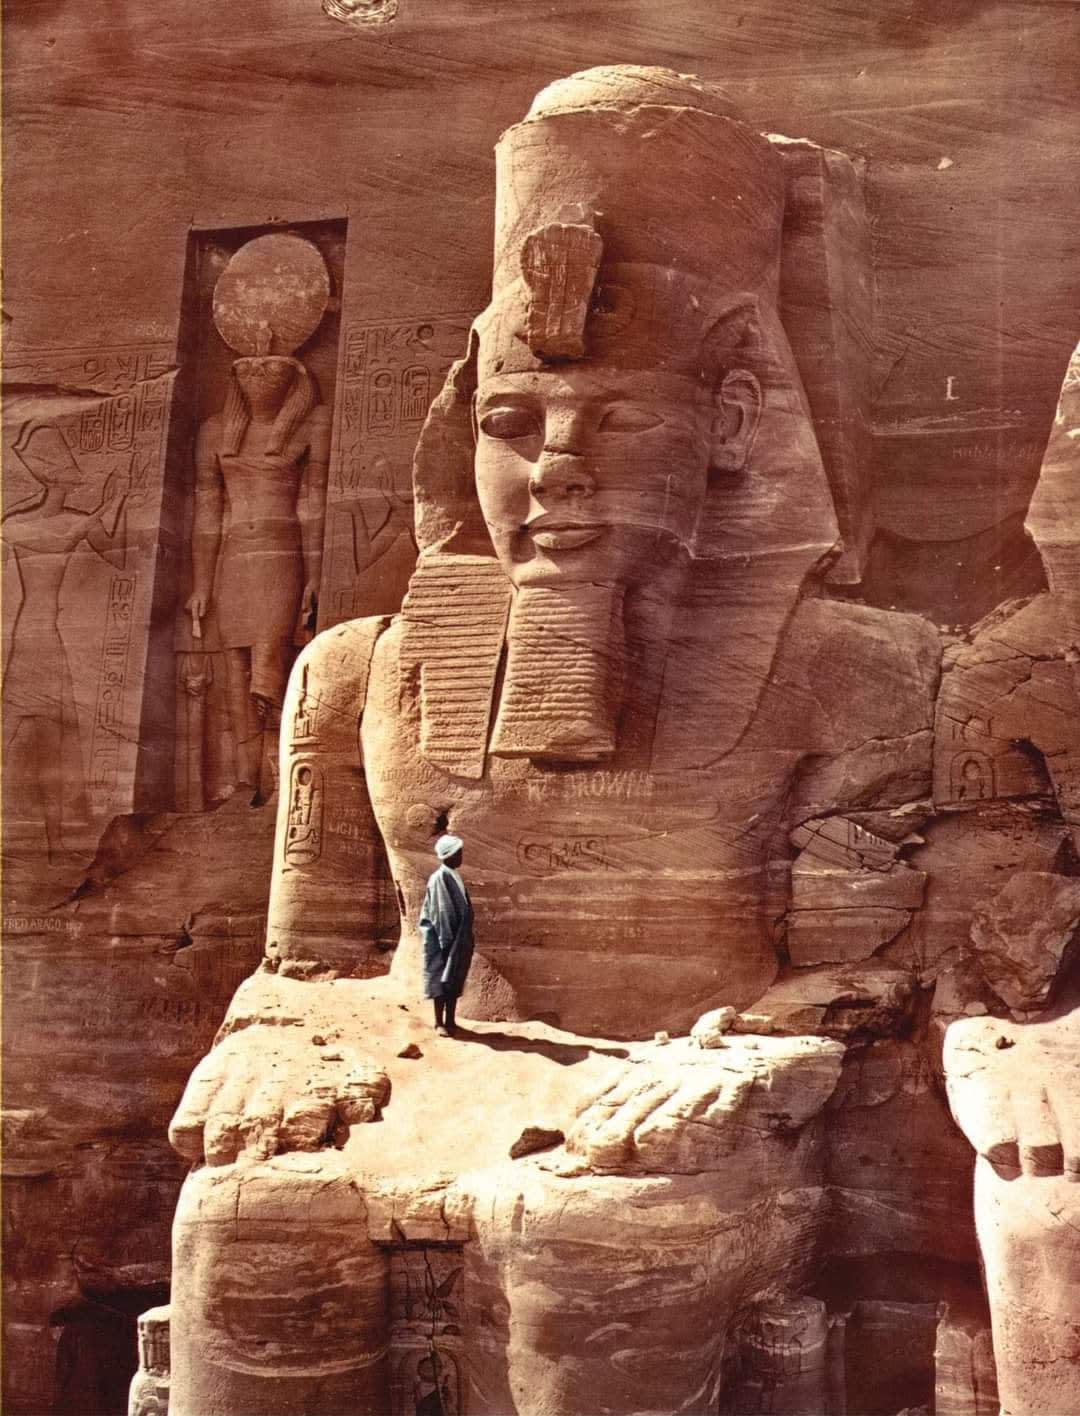 Colourised photo of a man standing on a colossal figure of Ramesses II at the temple of Abu Simbel, Egypt, 1865